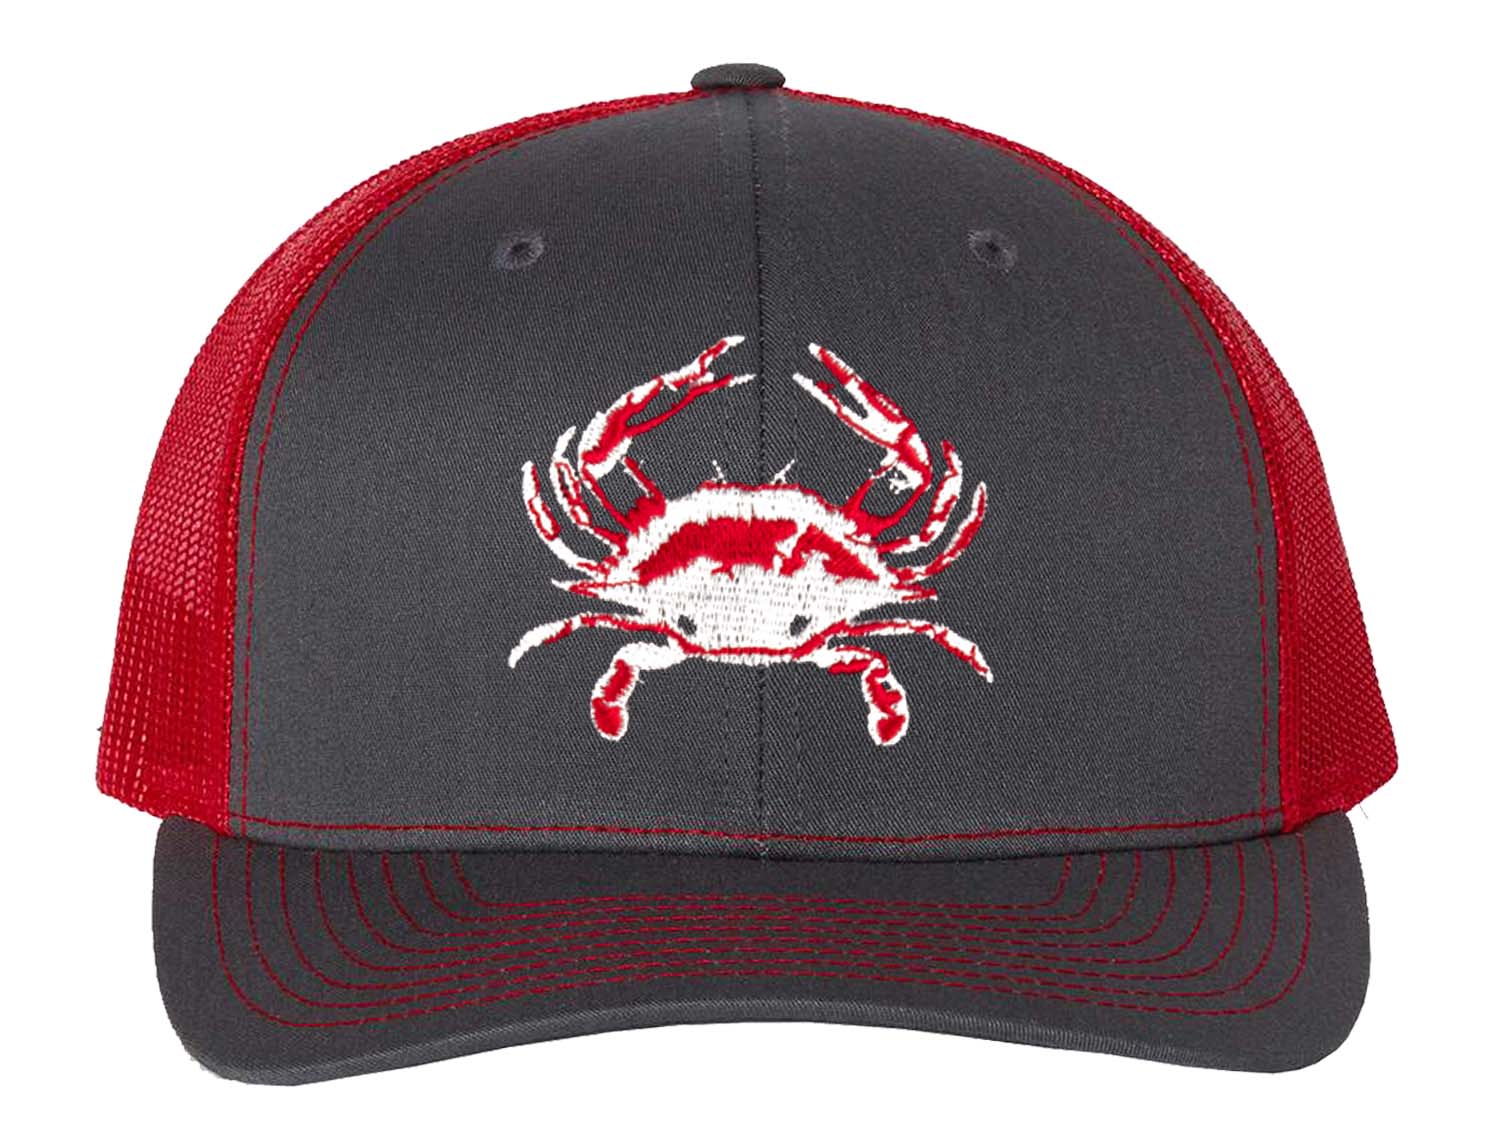 Blue Crab "Reel Crabby" Structured Trucker Hat - Charcoal/Red Mesh